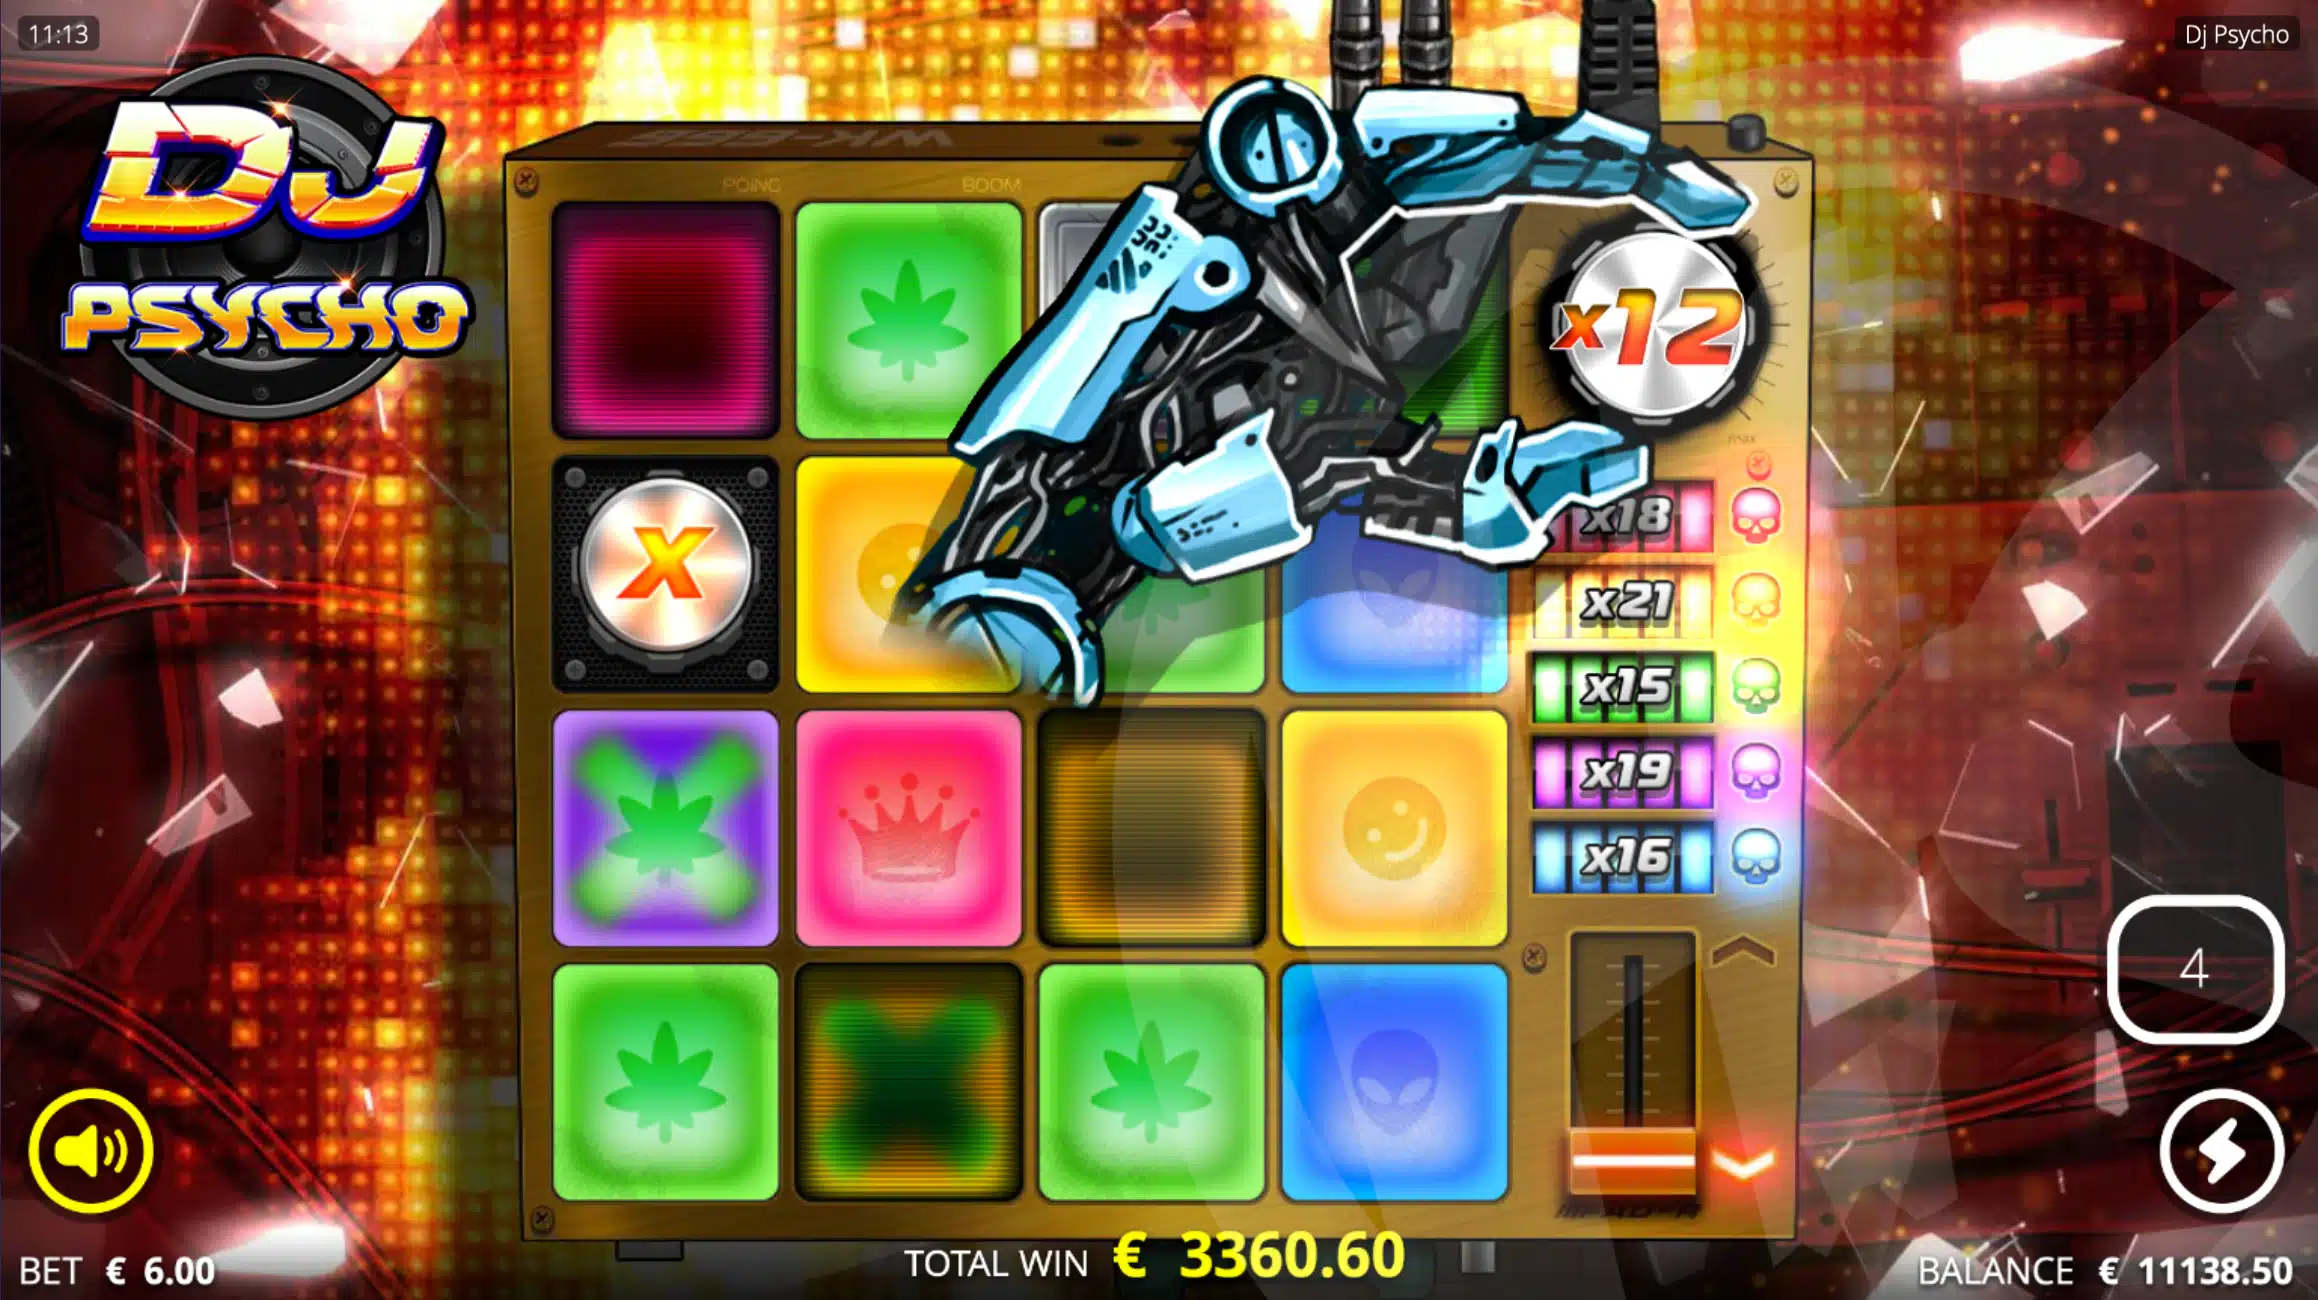 Overall Multiplier Values are Sticky During Psycho Spinz